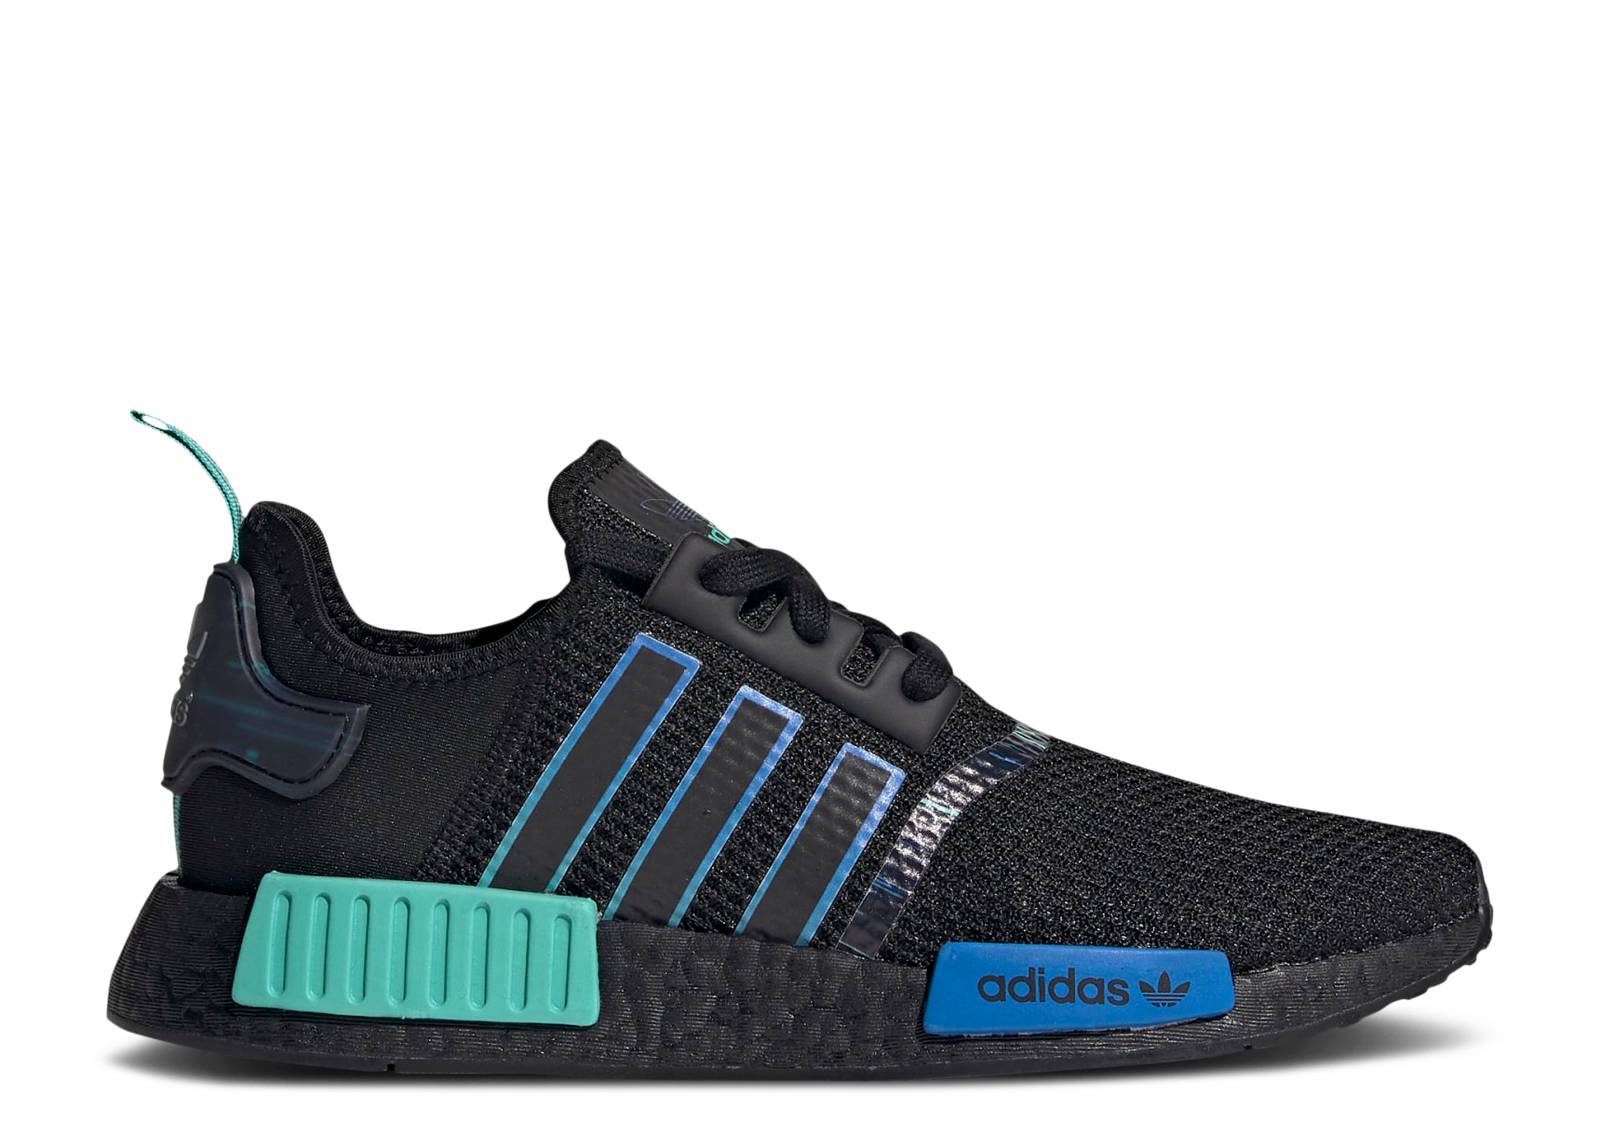 NMD_R1 'Gaming Pack'